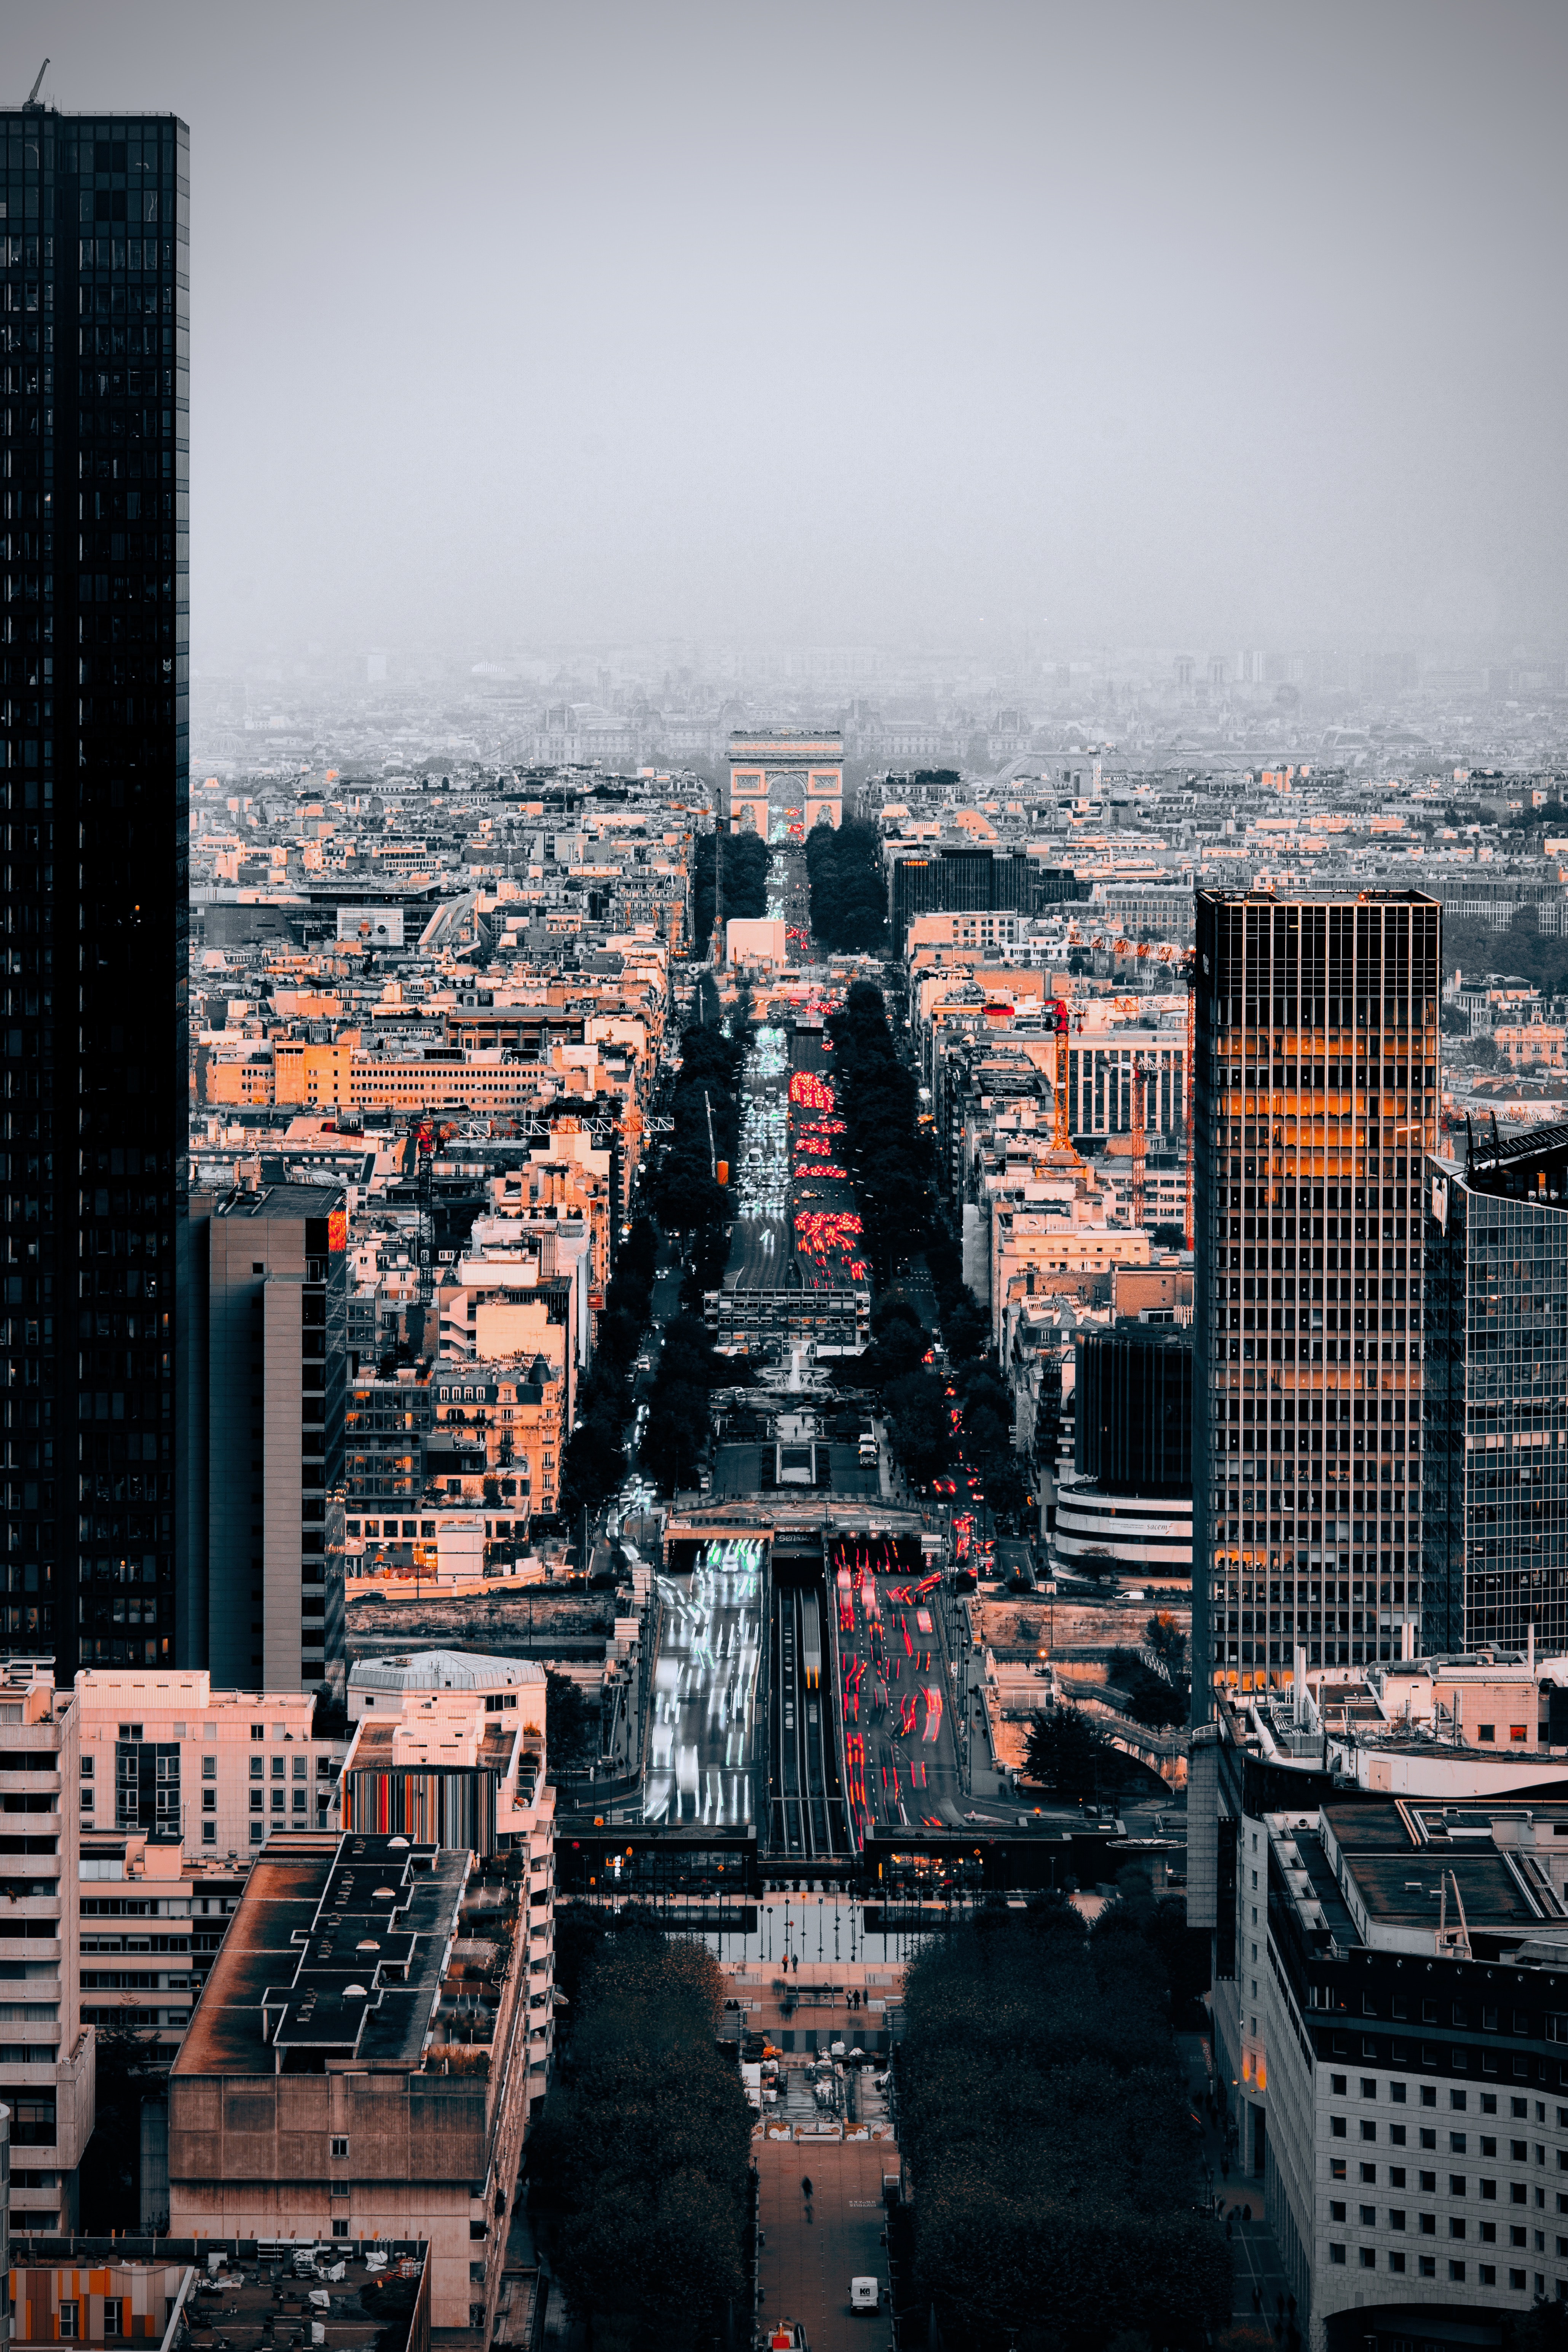 paris, cities, architecture, city, building, view from above, france Full HD